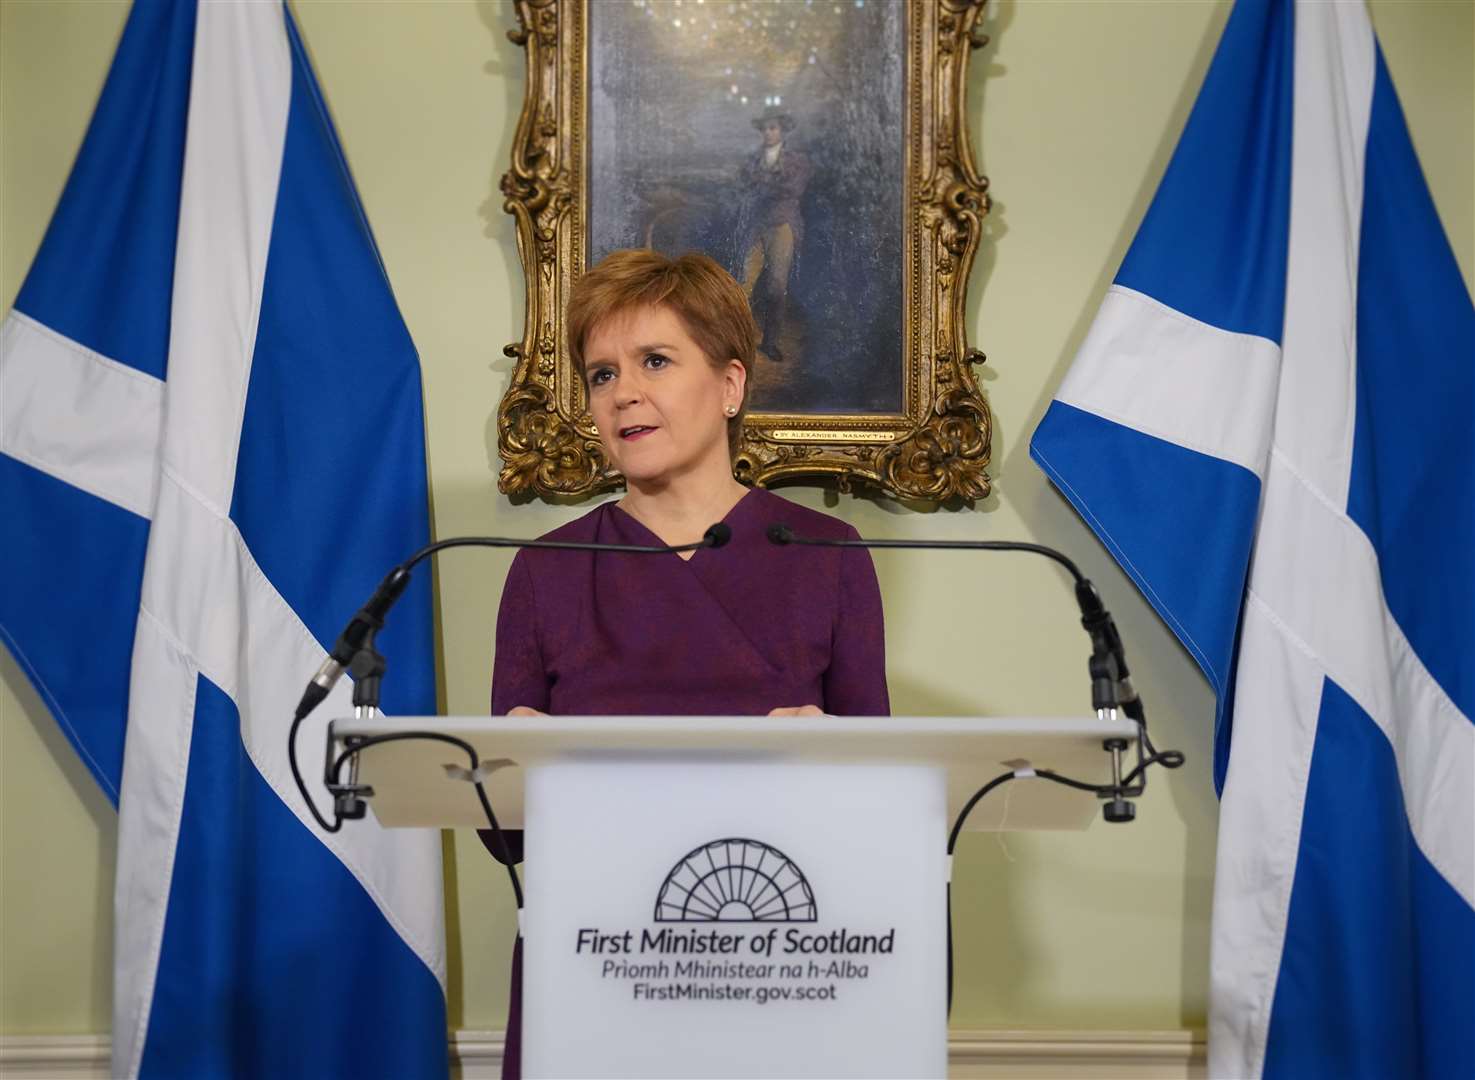 First Minister Nicola Sturgeon announced her resignation at Bute House this morning.